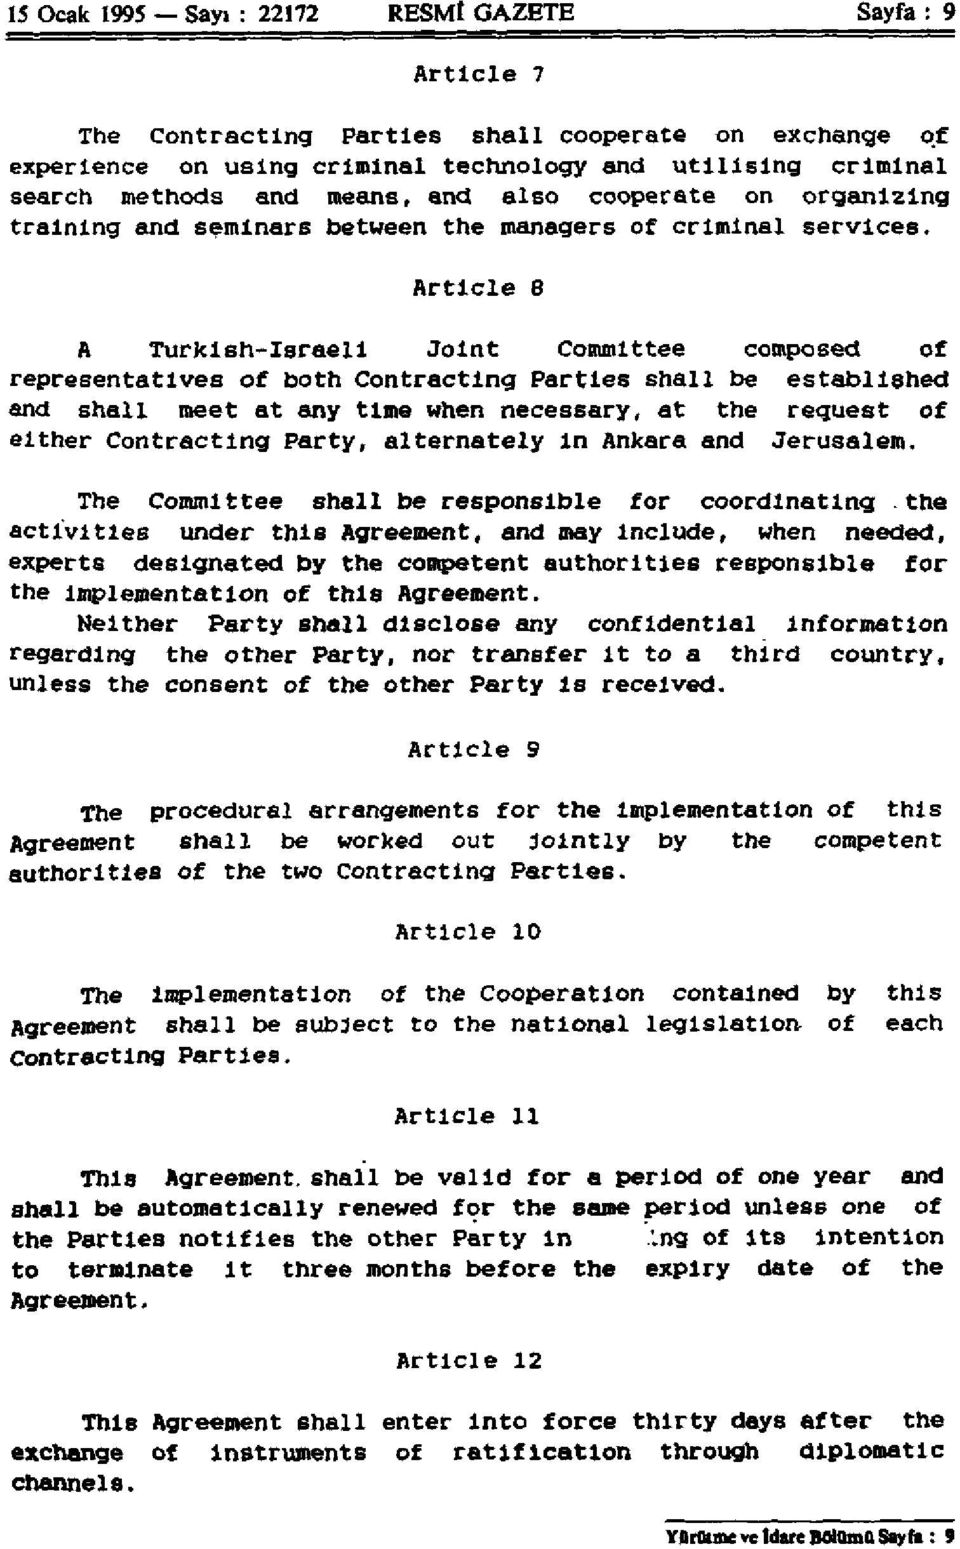 Article 8 A Turkish-Israeli Joint Committee composed of representatives of both Contracting Parties shall be established and shall meet at any time when necessary, at the request of either